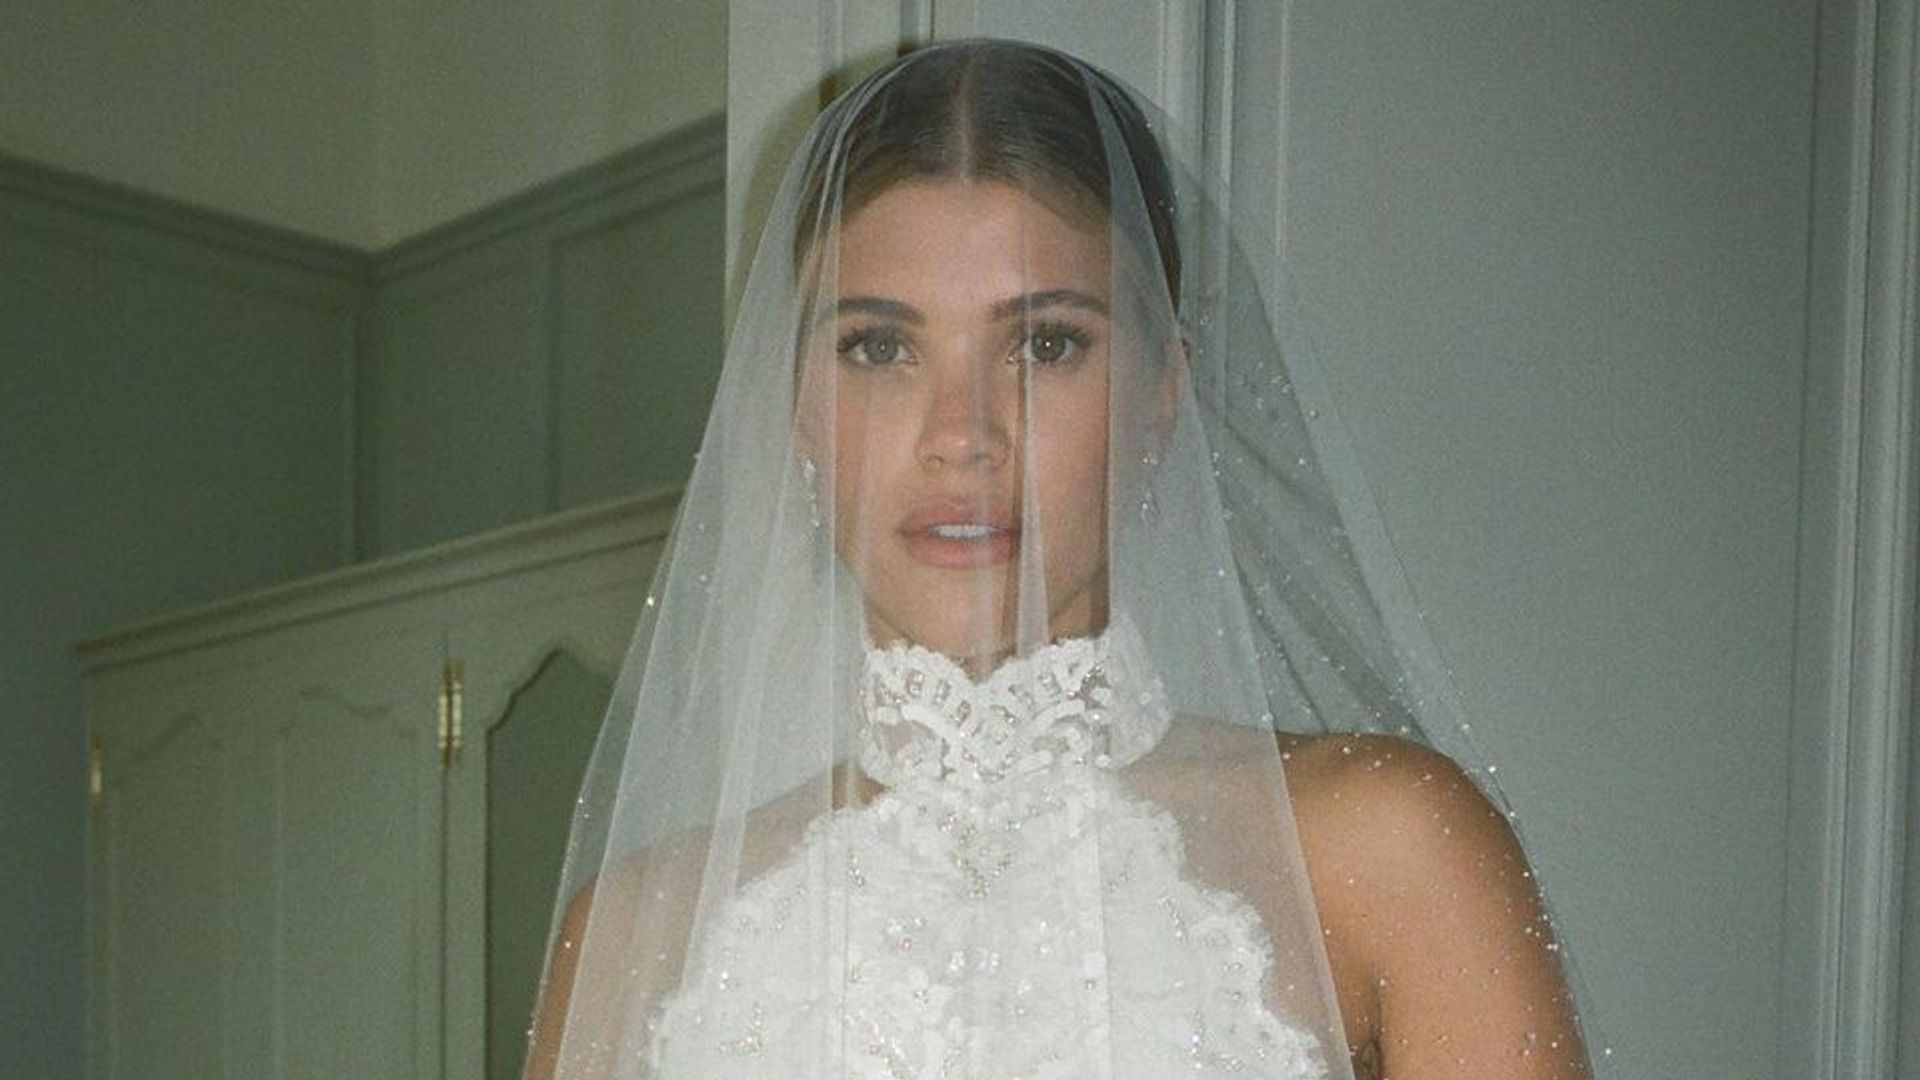 Sofia Richie was not meant to wear three Chanel wedding dresses